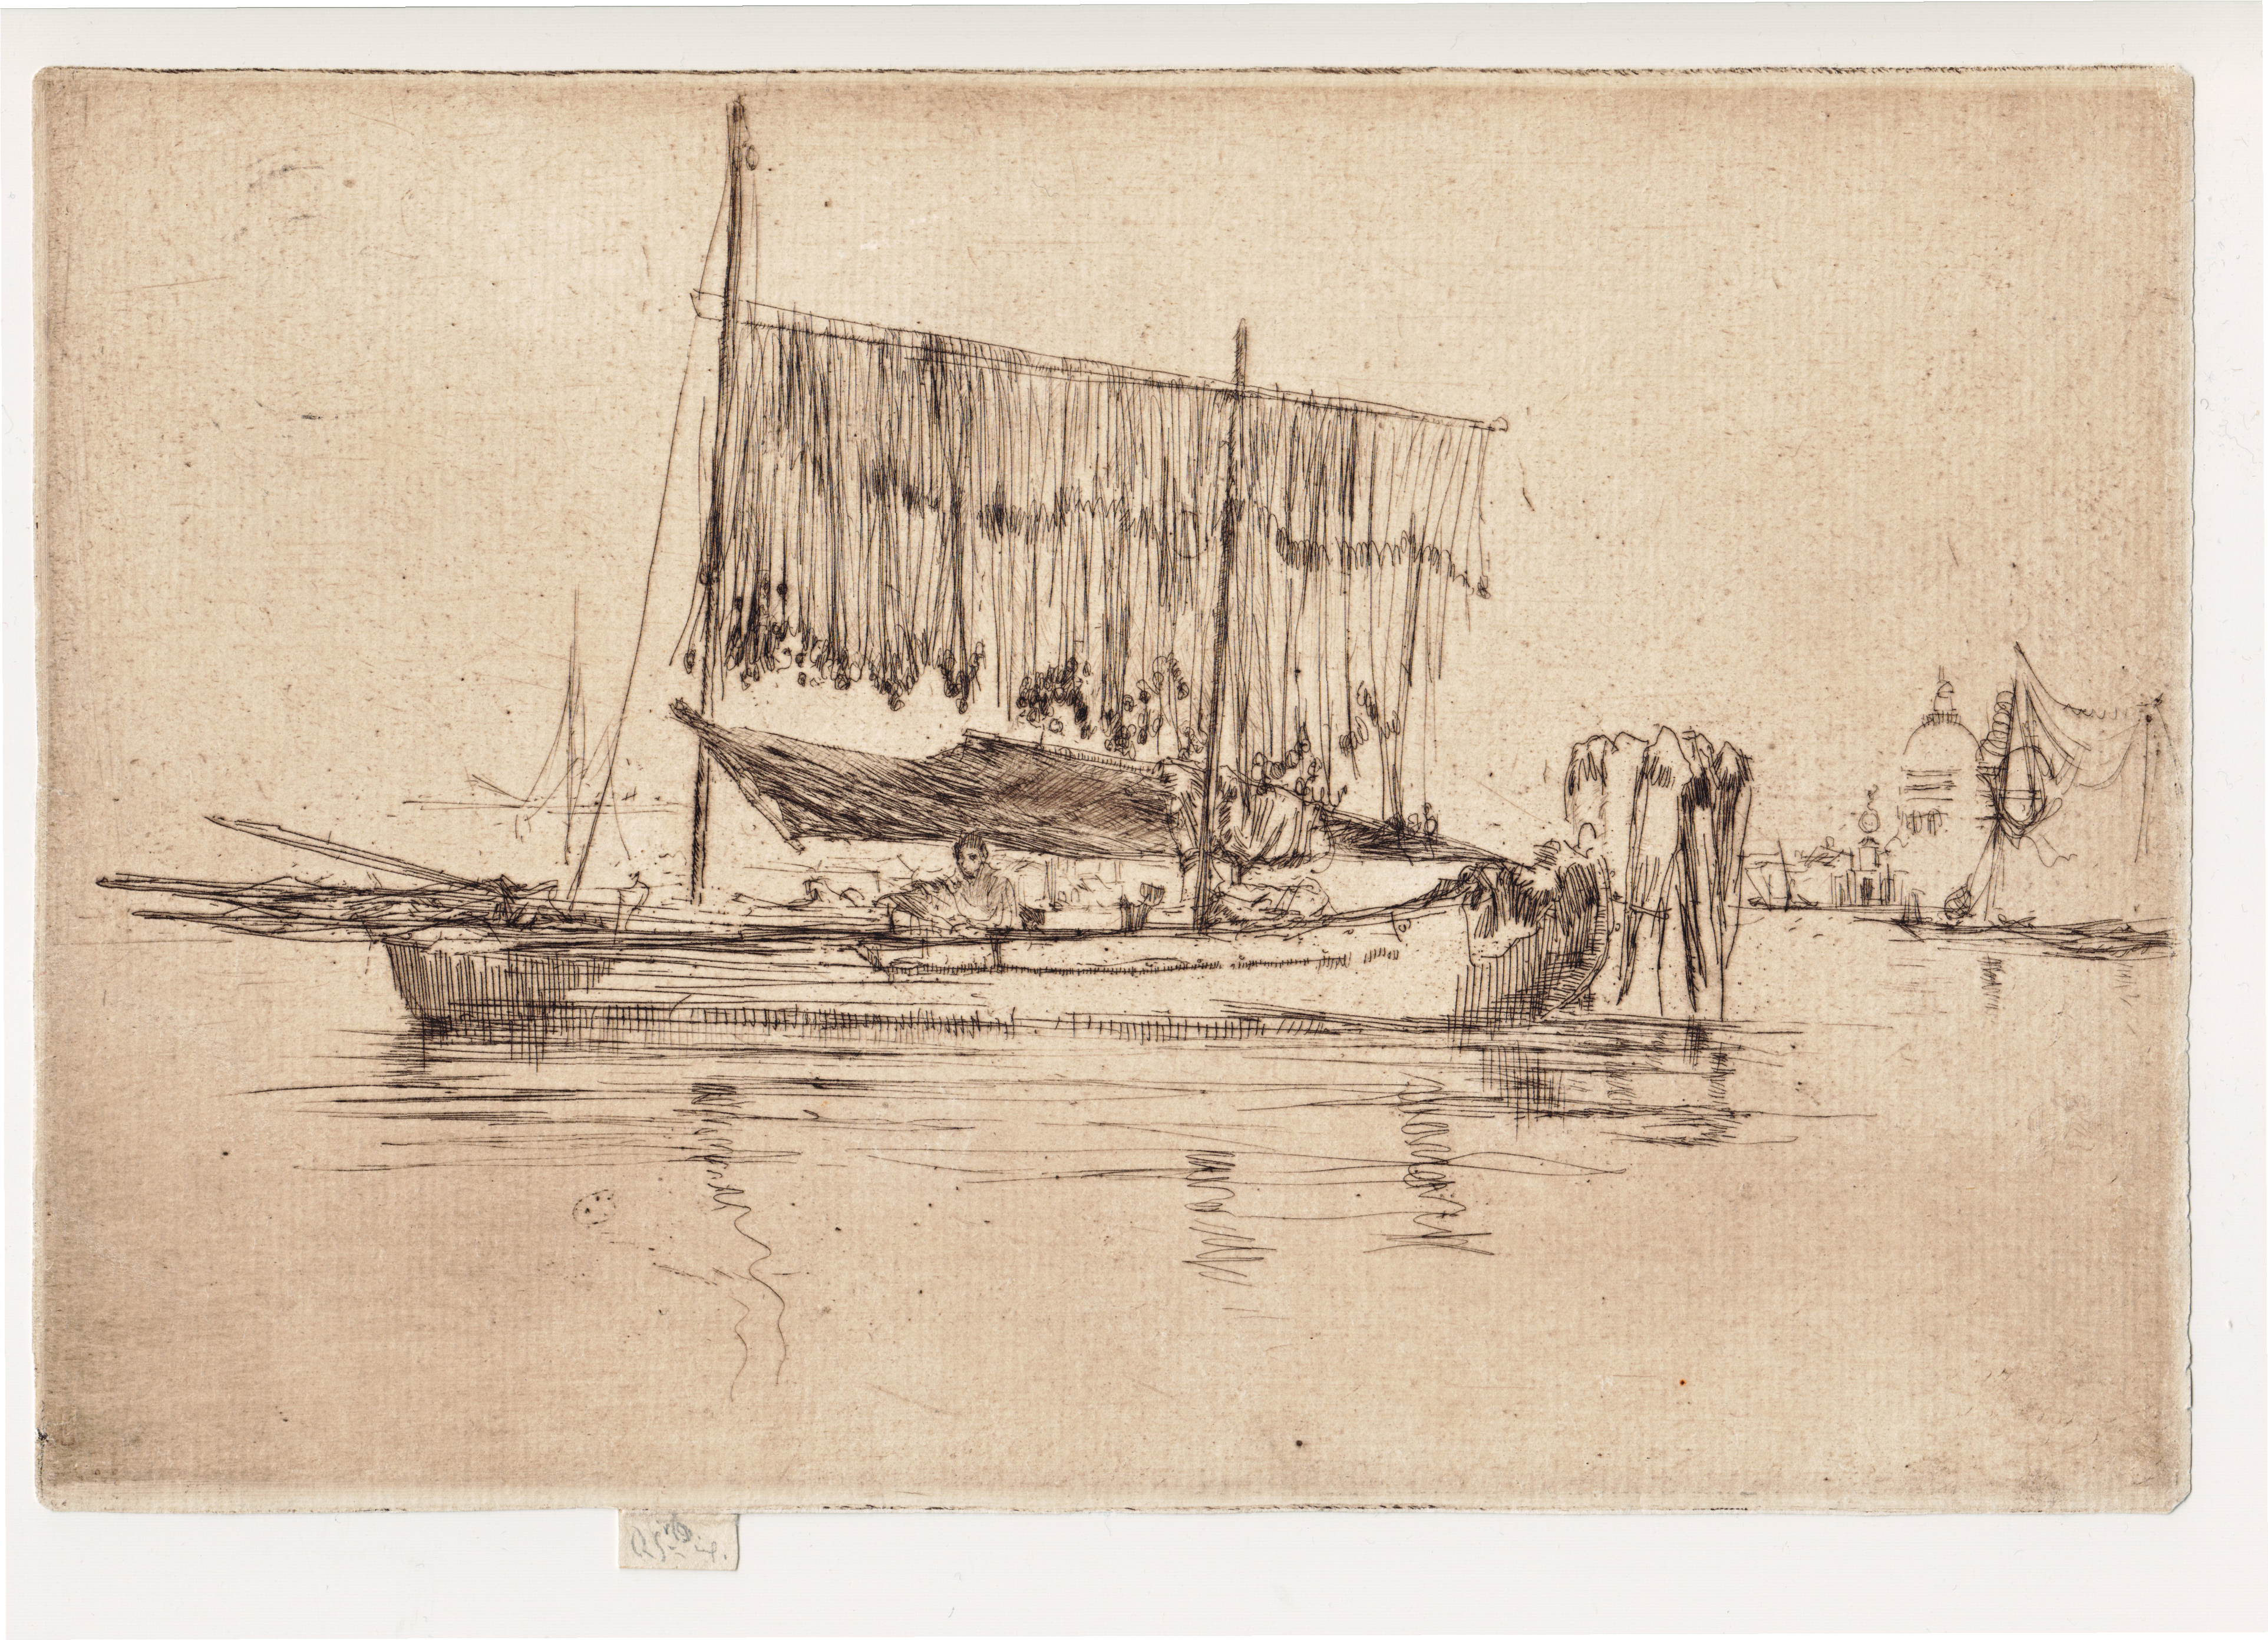 James McNeill Whistler, Fishing Boat, etching, 1879-1880